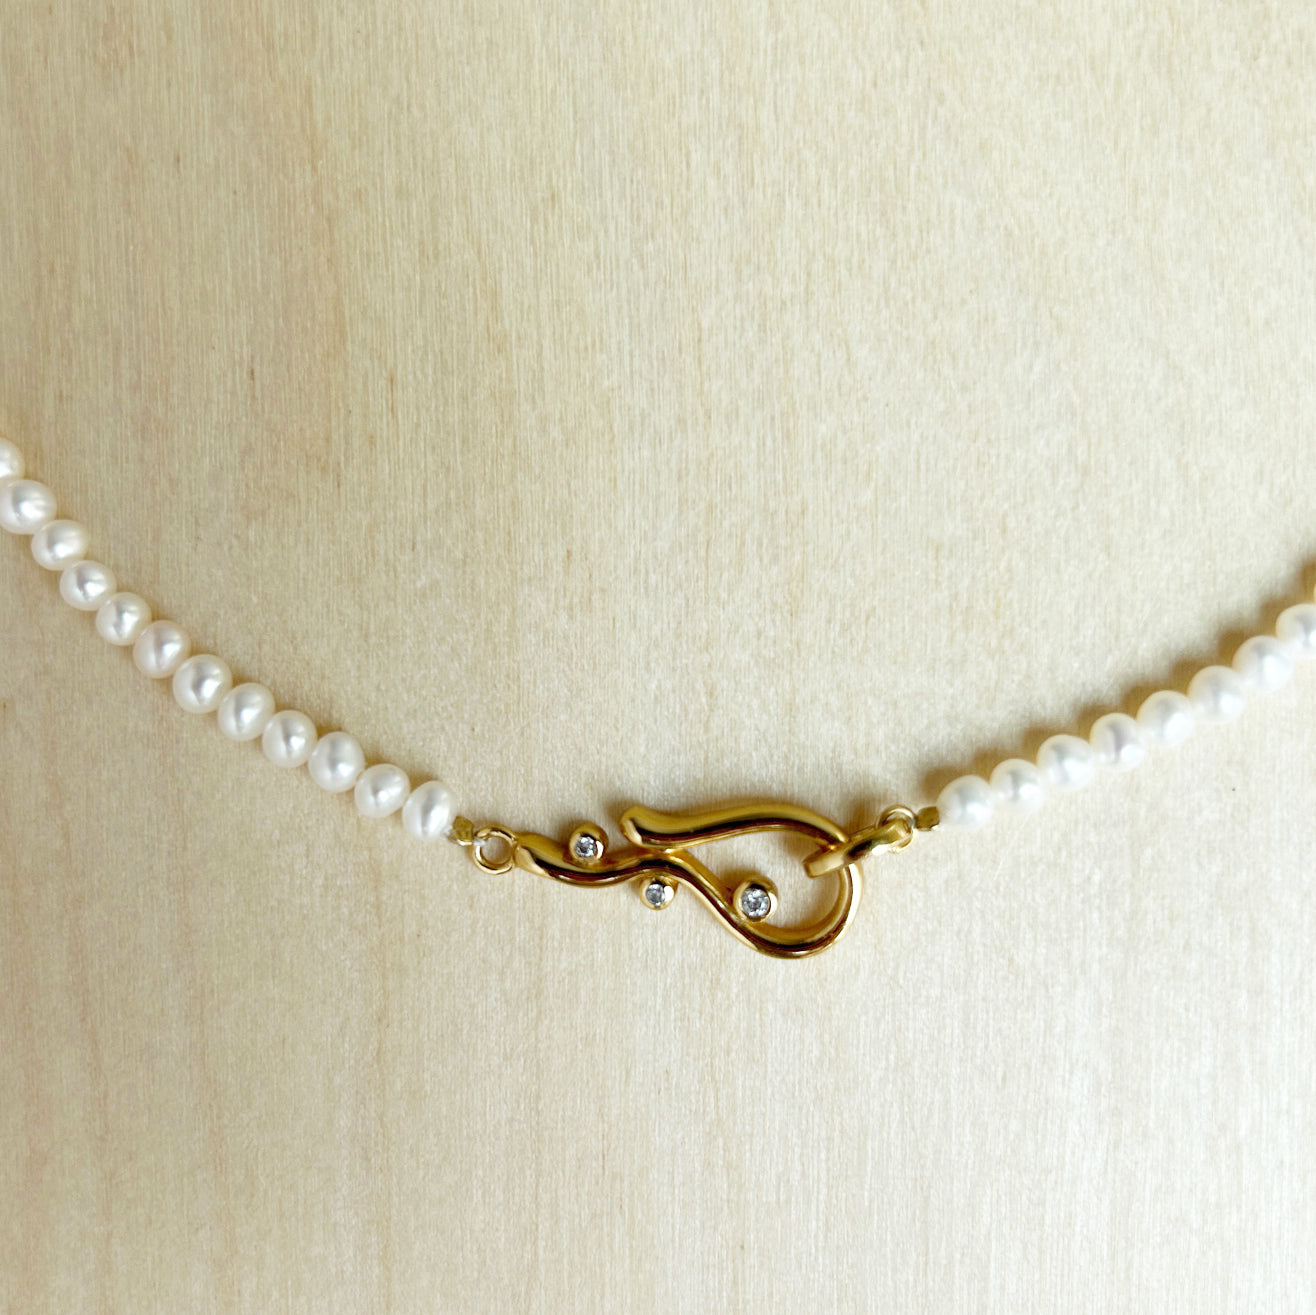 Fresh water seed Pearl Necklace with Stone Hook Detail - SAMPLE SALE